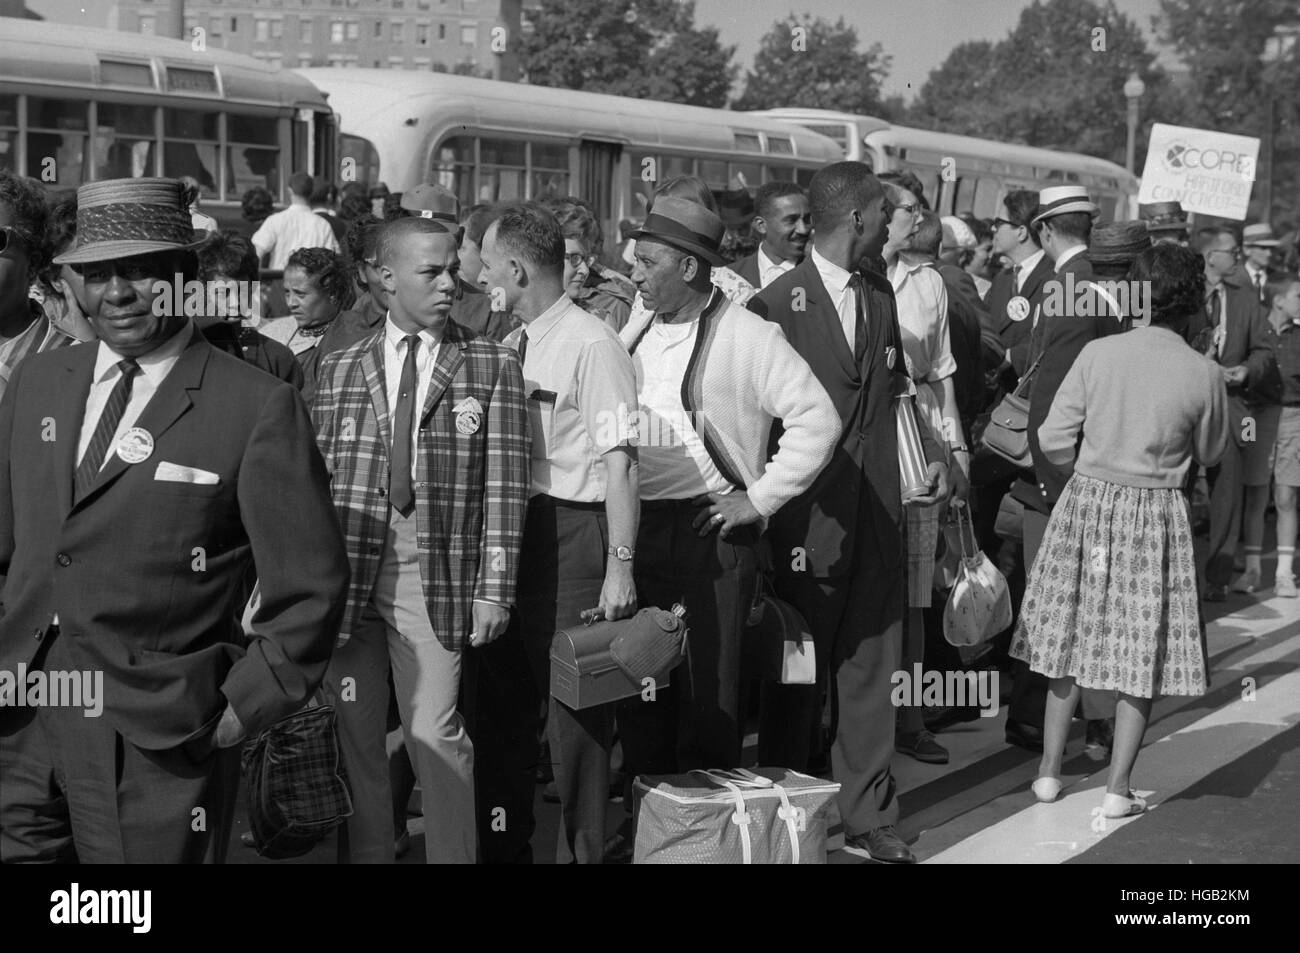 Marchers arriving by bus at the March on Washington in Washington, D.C., 1963 Stock Photo